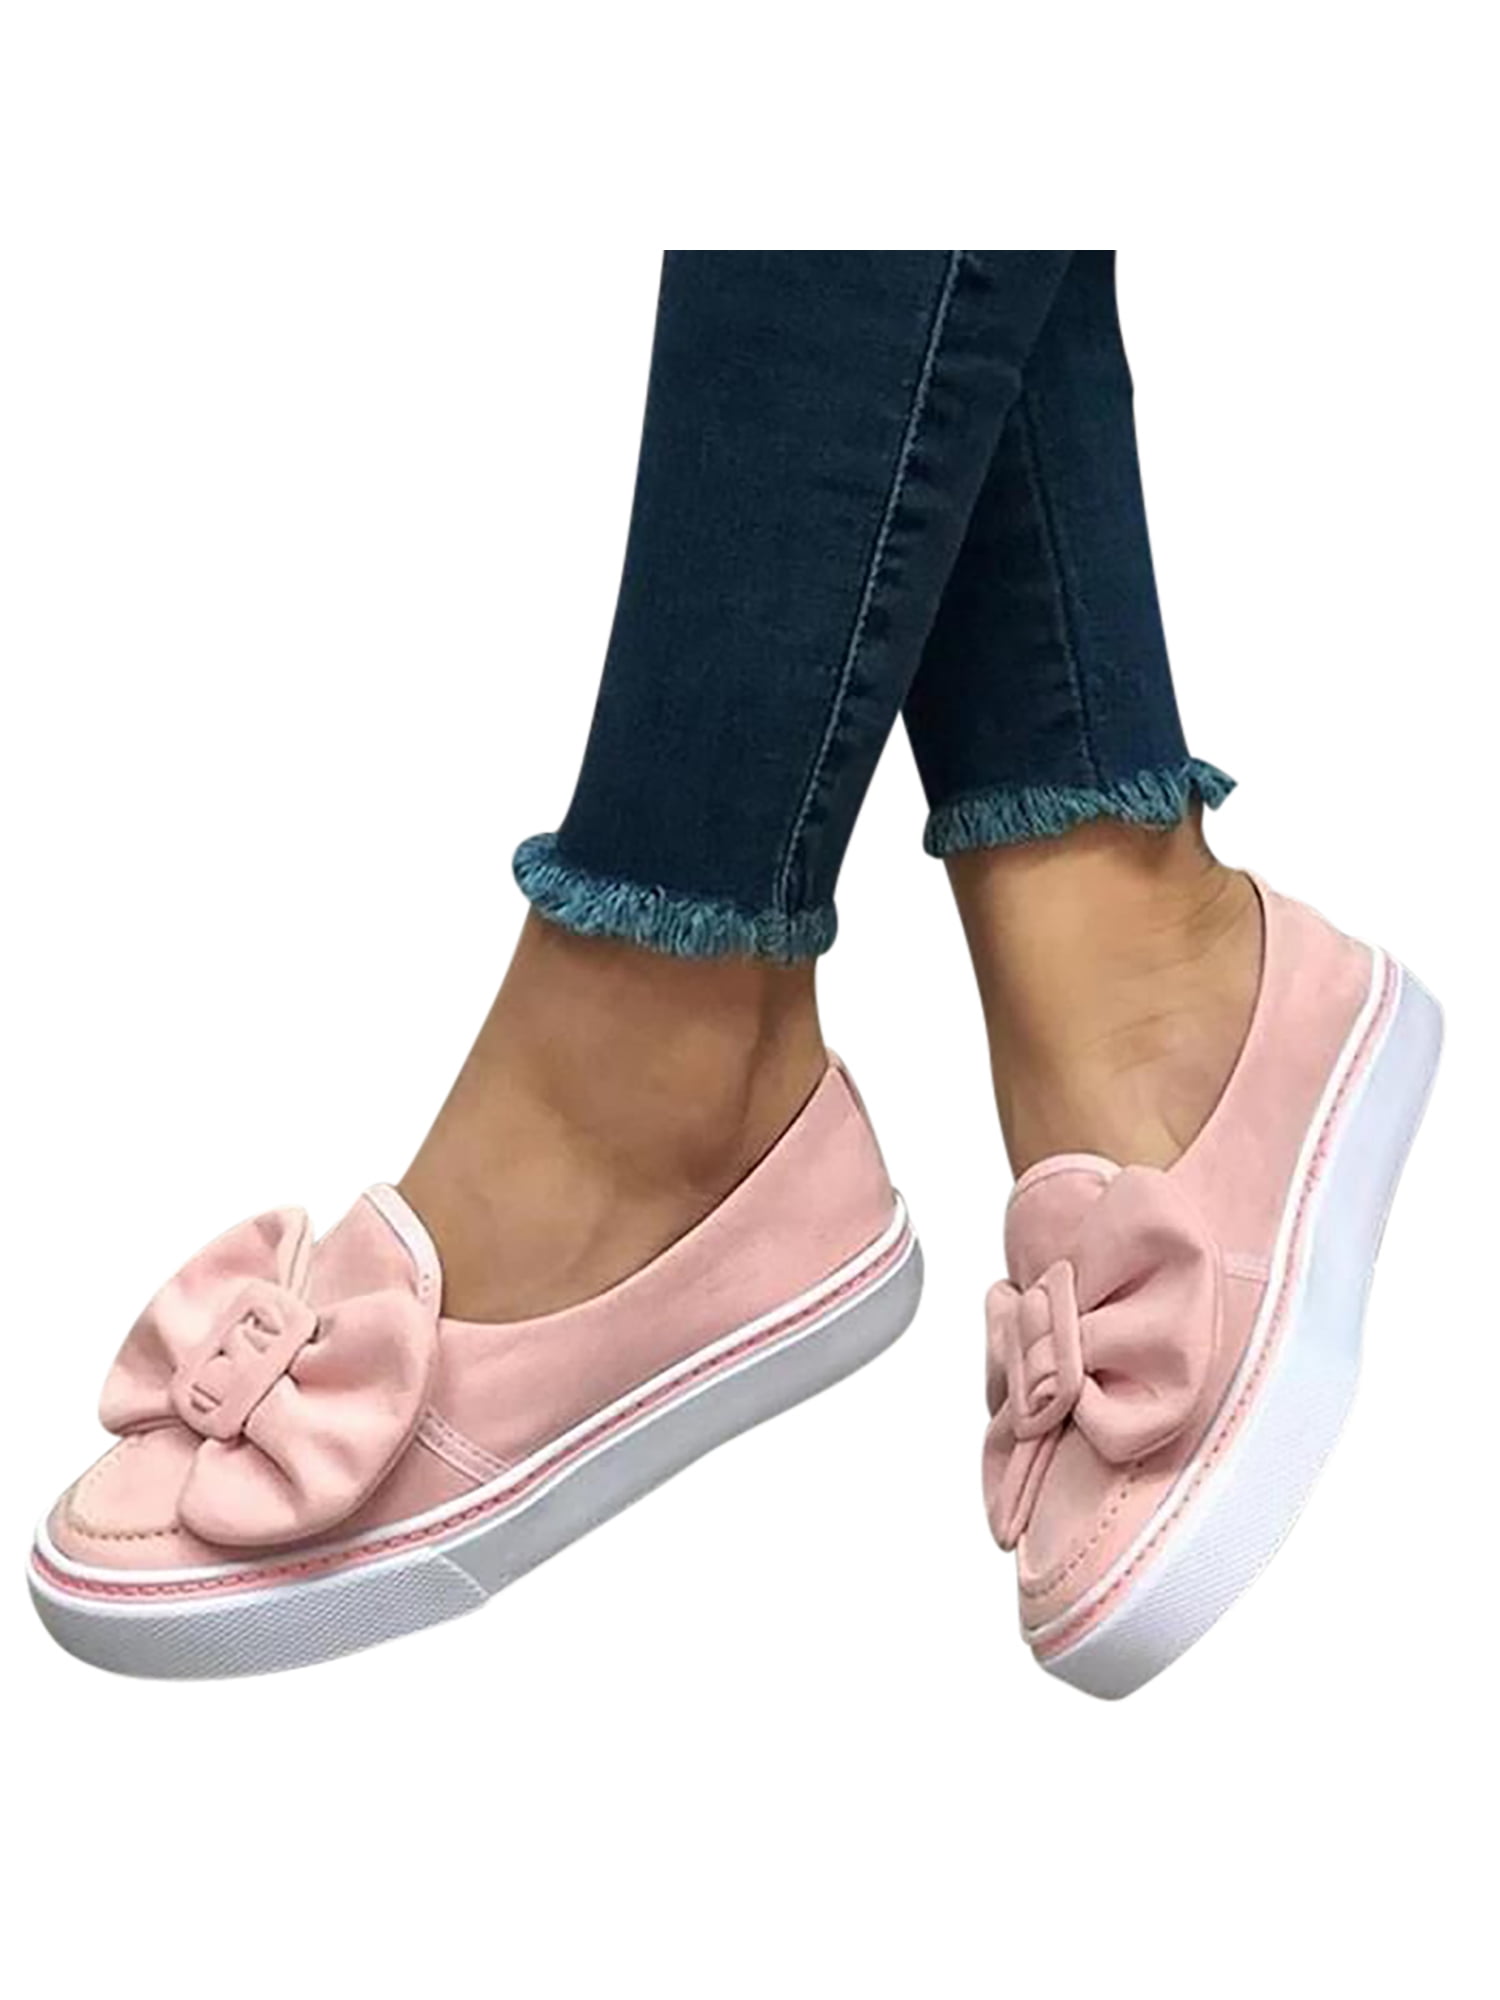 L@YC Women Flat Shoes Spring and Autumn Comfortable Leather Flat with Leather Bow Knot Office